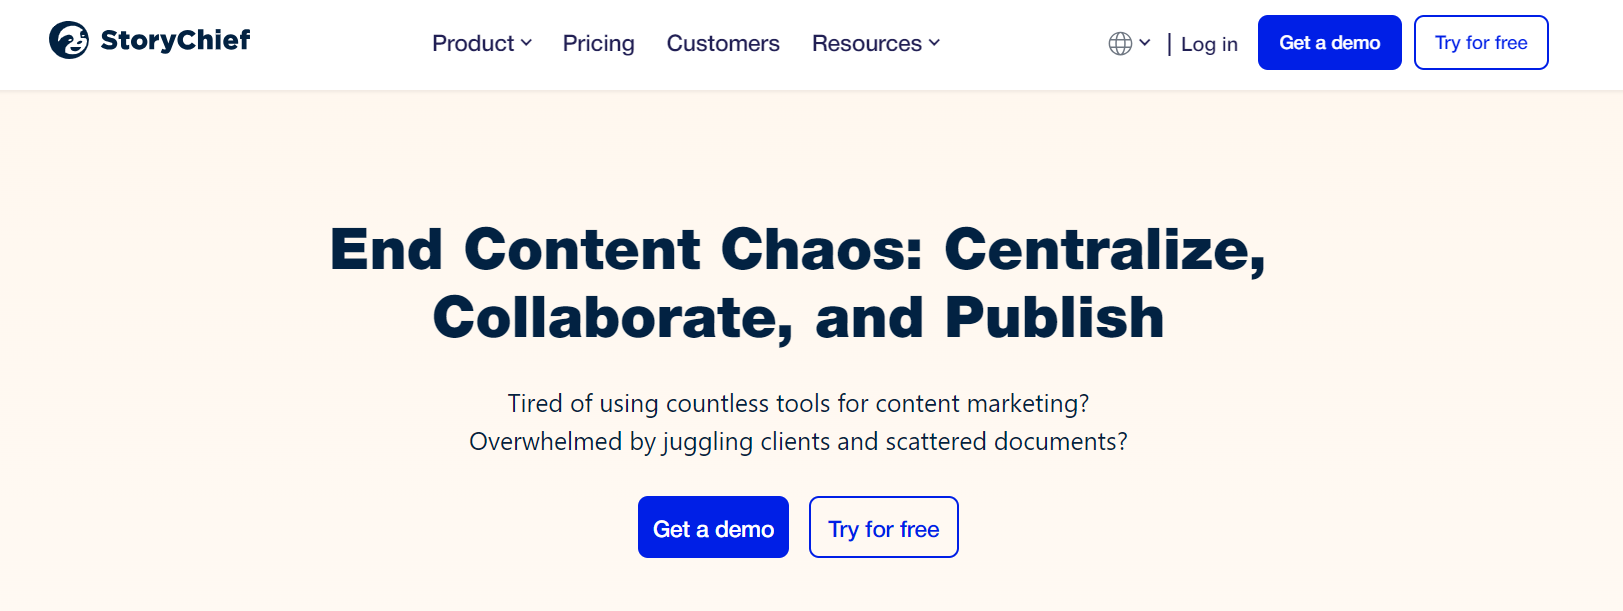 StoryChief - Content distribution automation tool